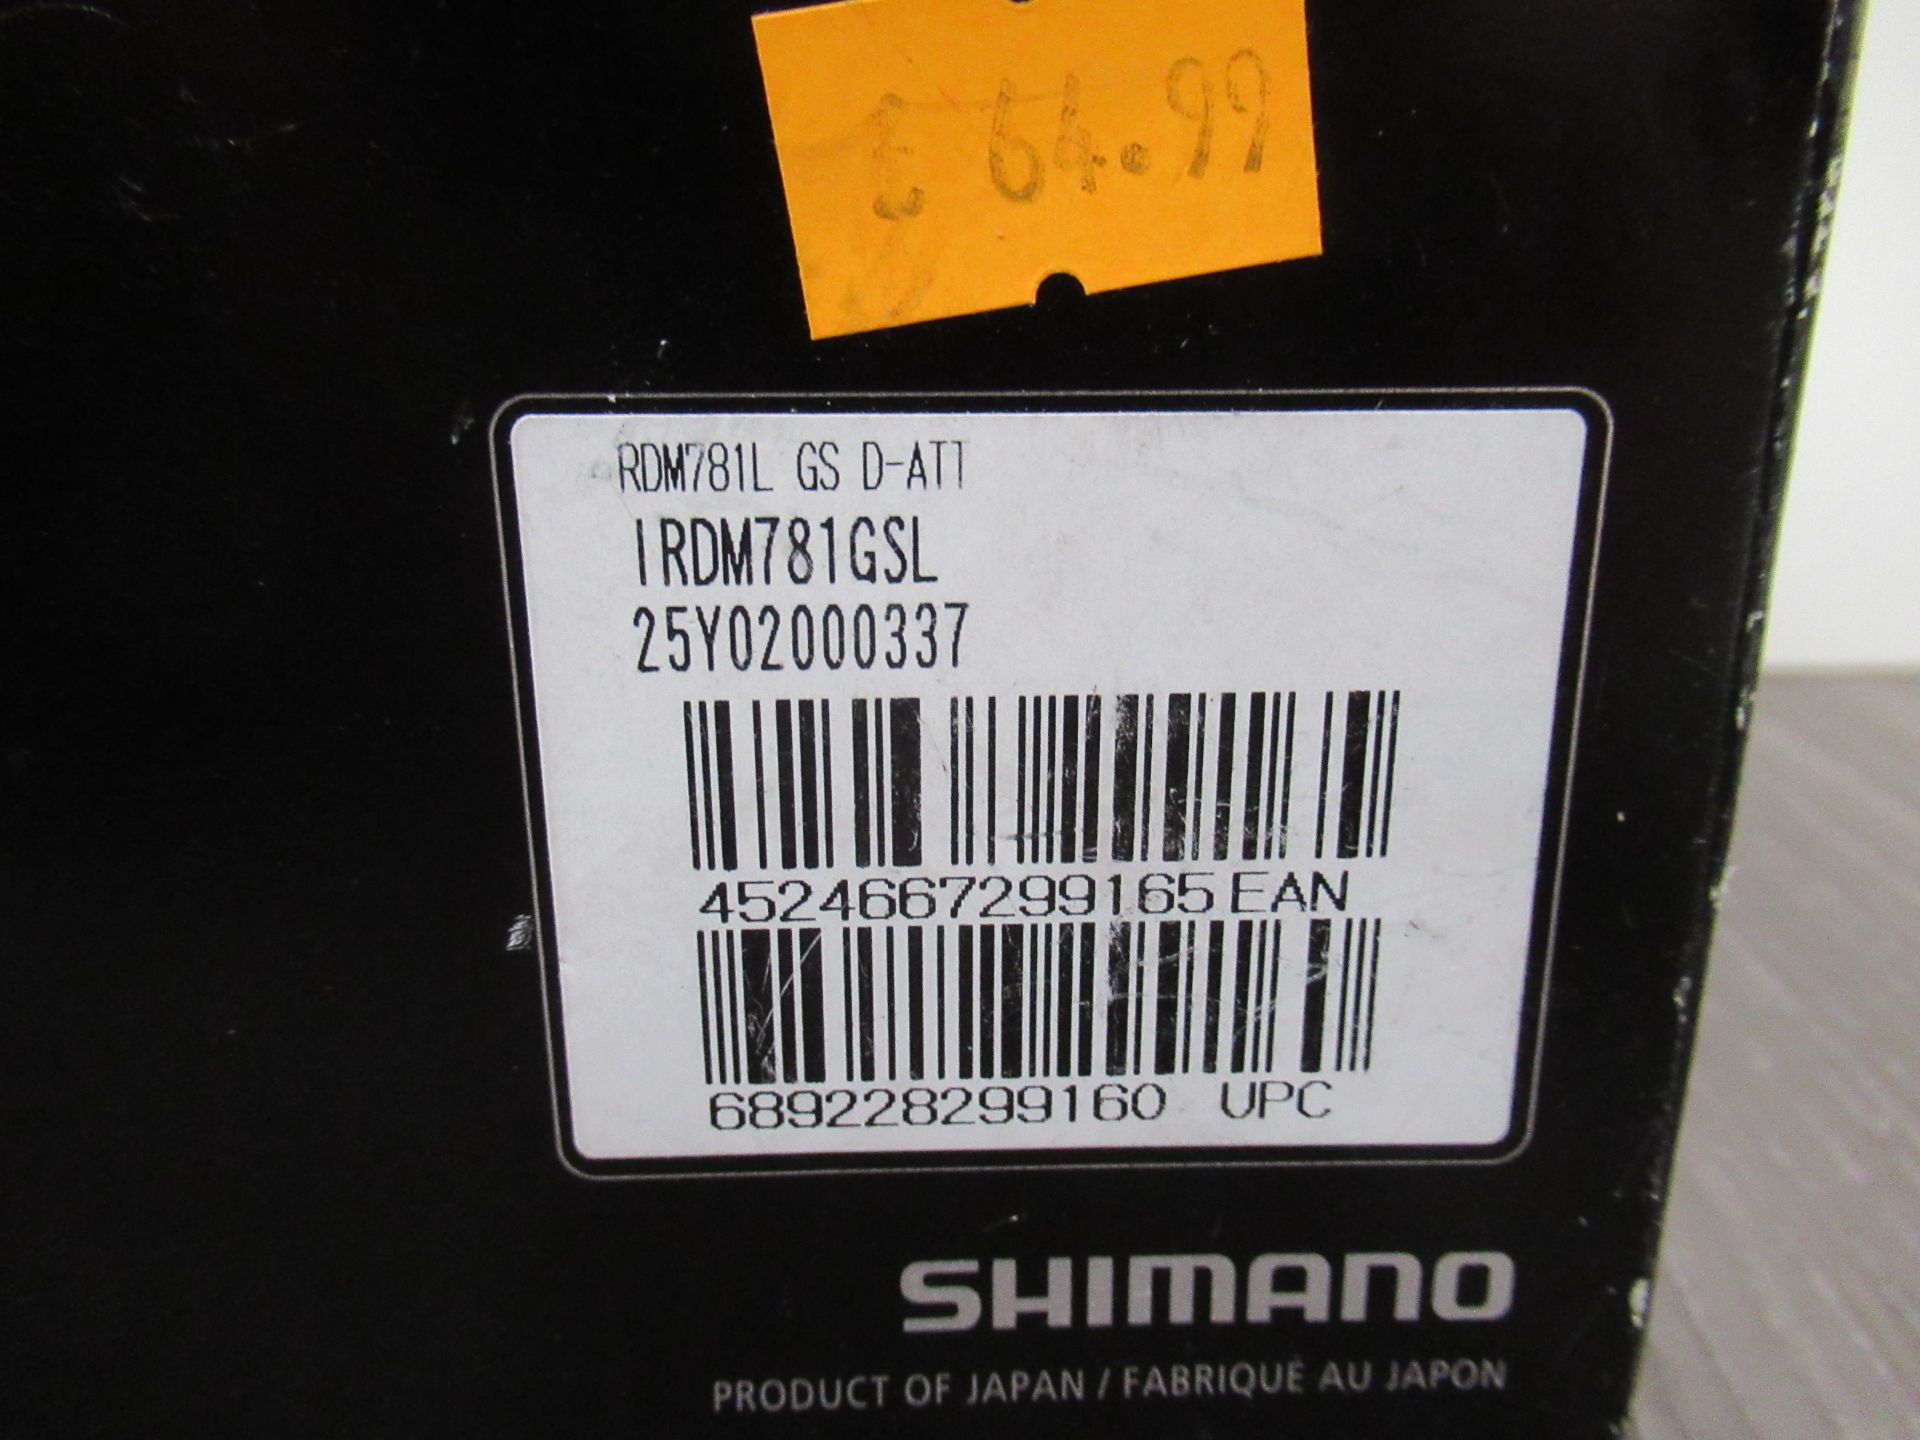 5 x Shimano Deore XT derailleurs to include models RD-T8000-SGS; FD-T8000-L-3; FD-T8000-H-3; RD-M781 - Image 6 of 6